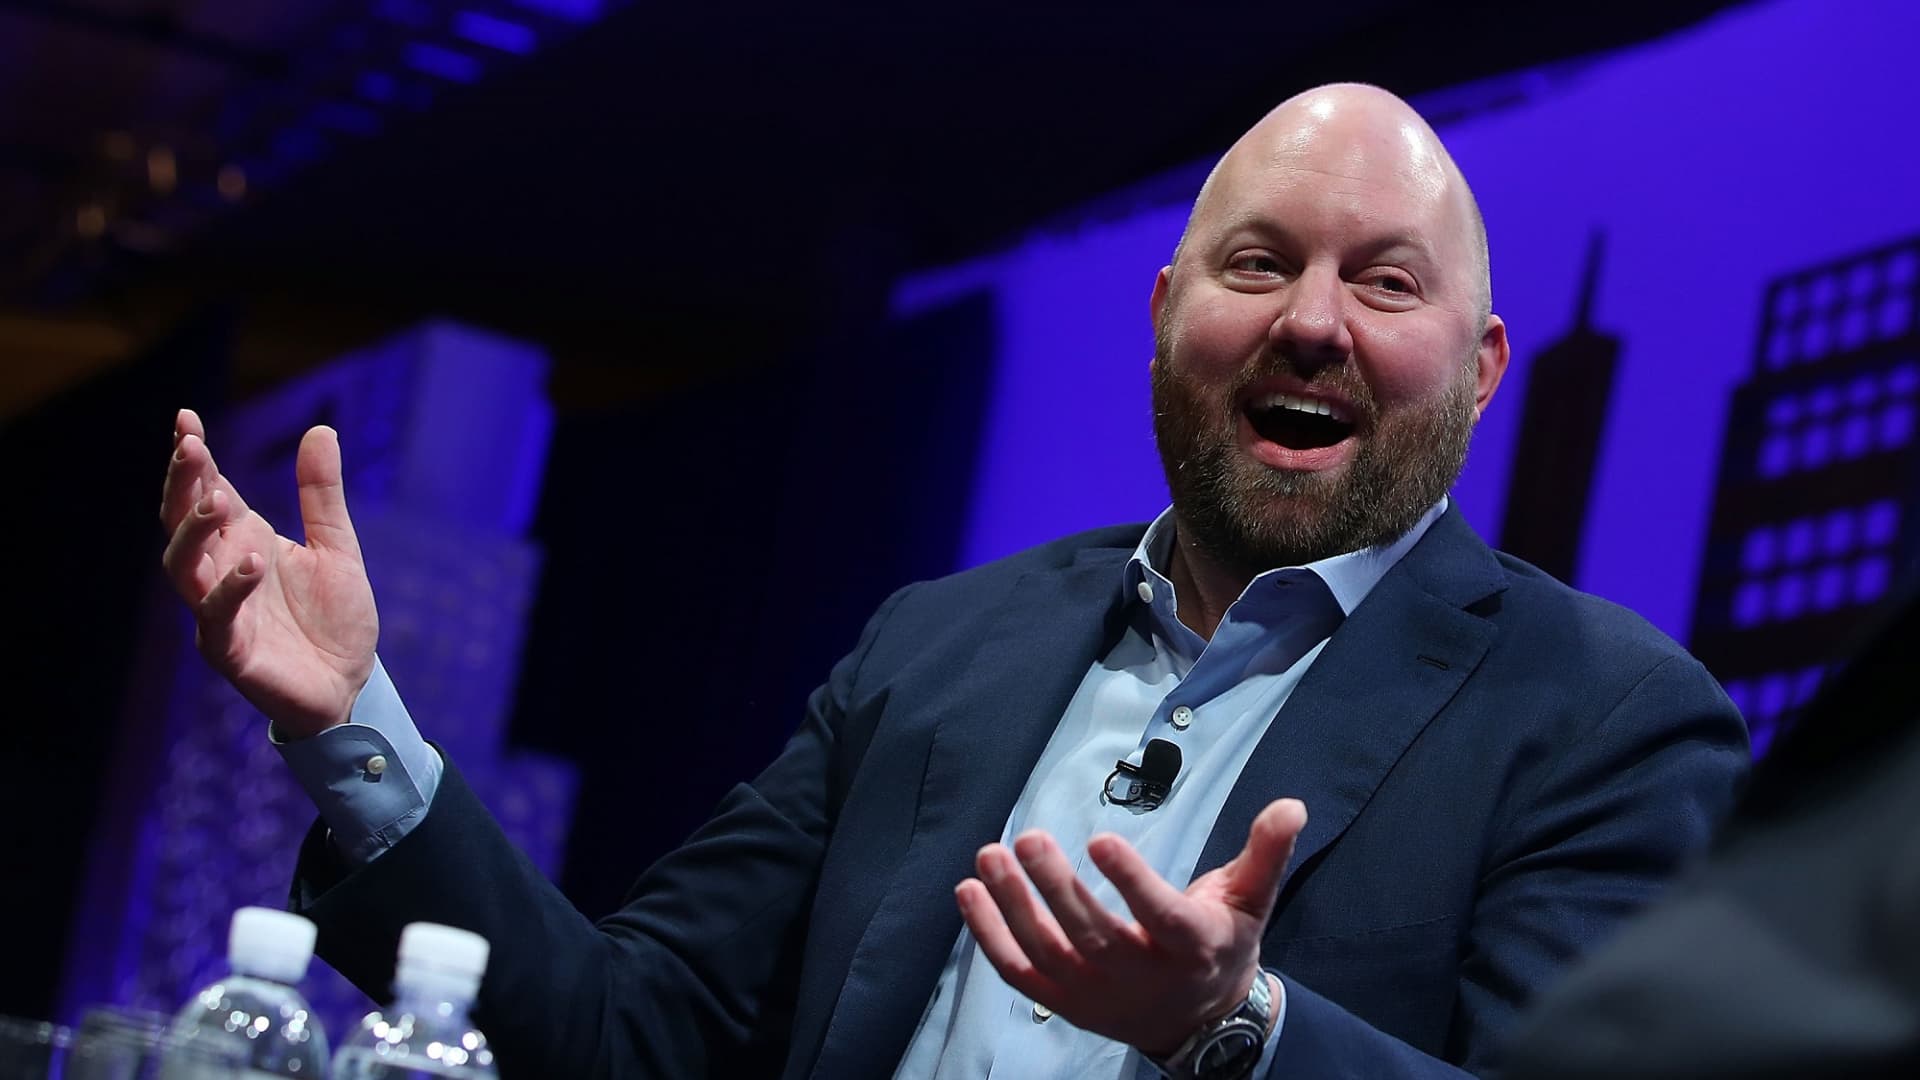 Andreessen Horowitz to open first office outside the U.S. in London in bet UK will become crypto hub